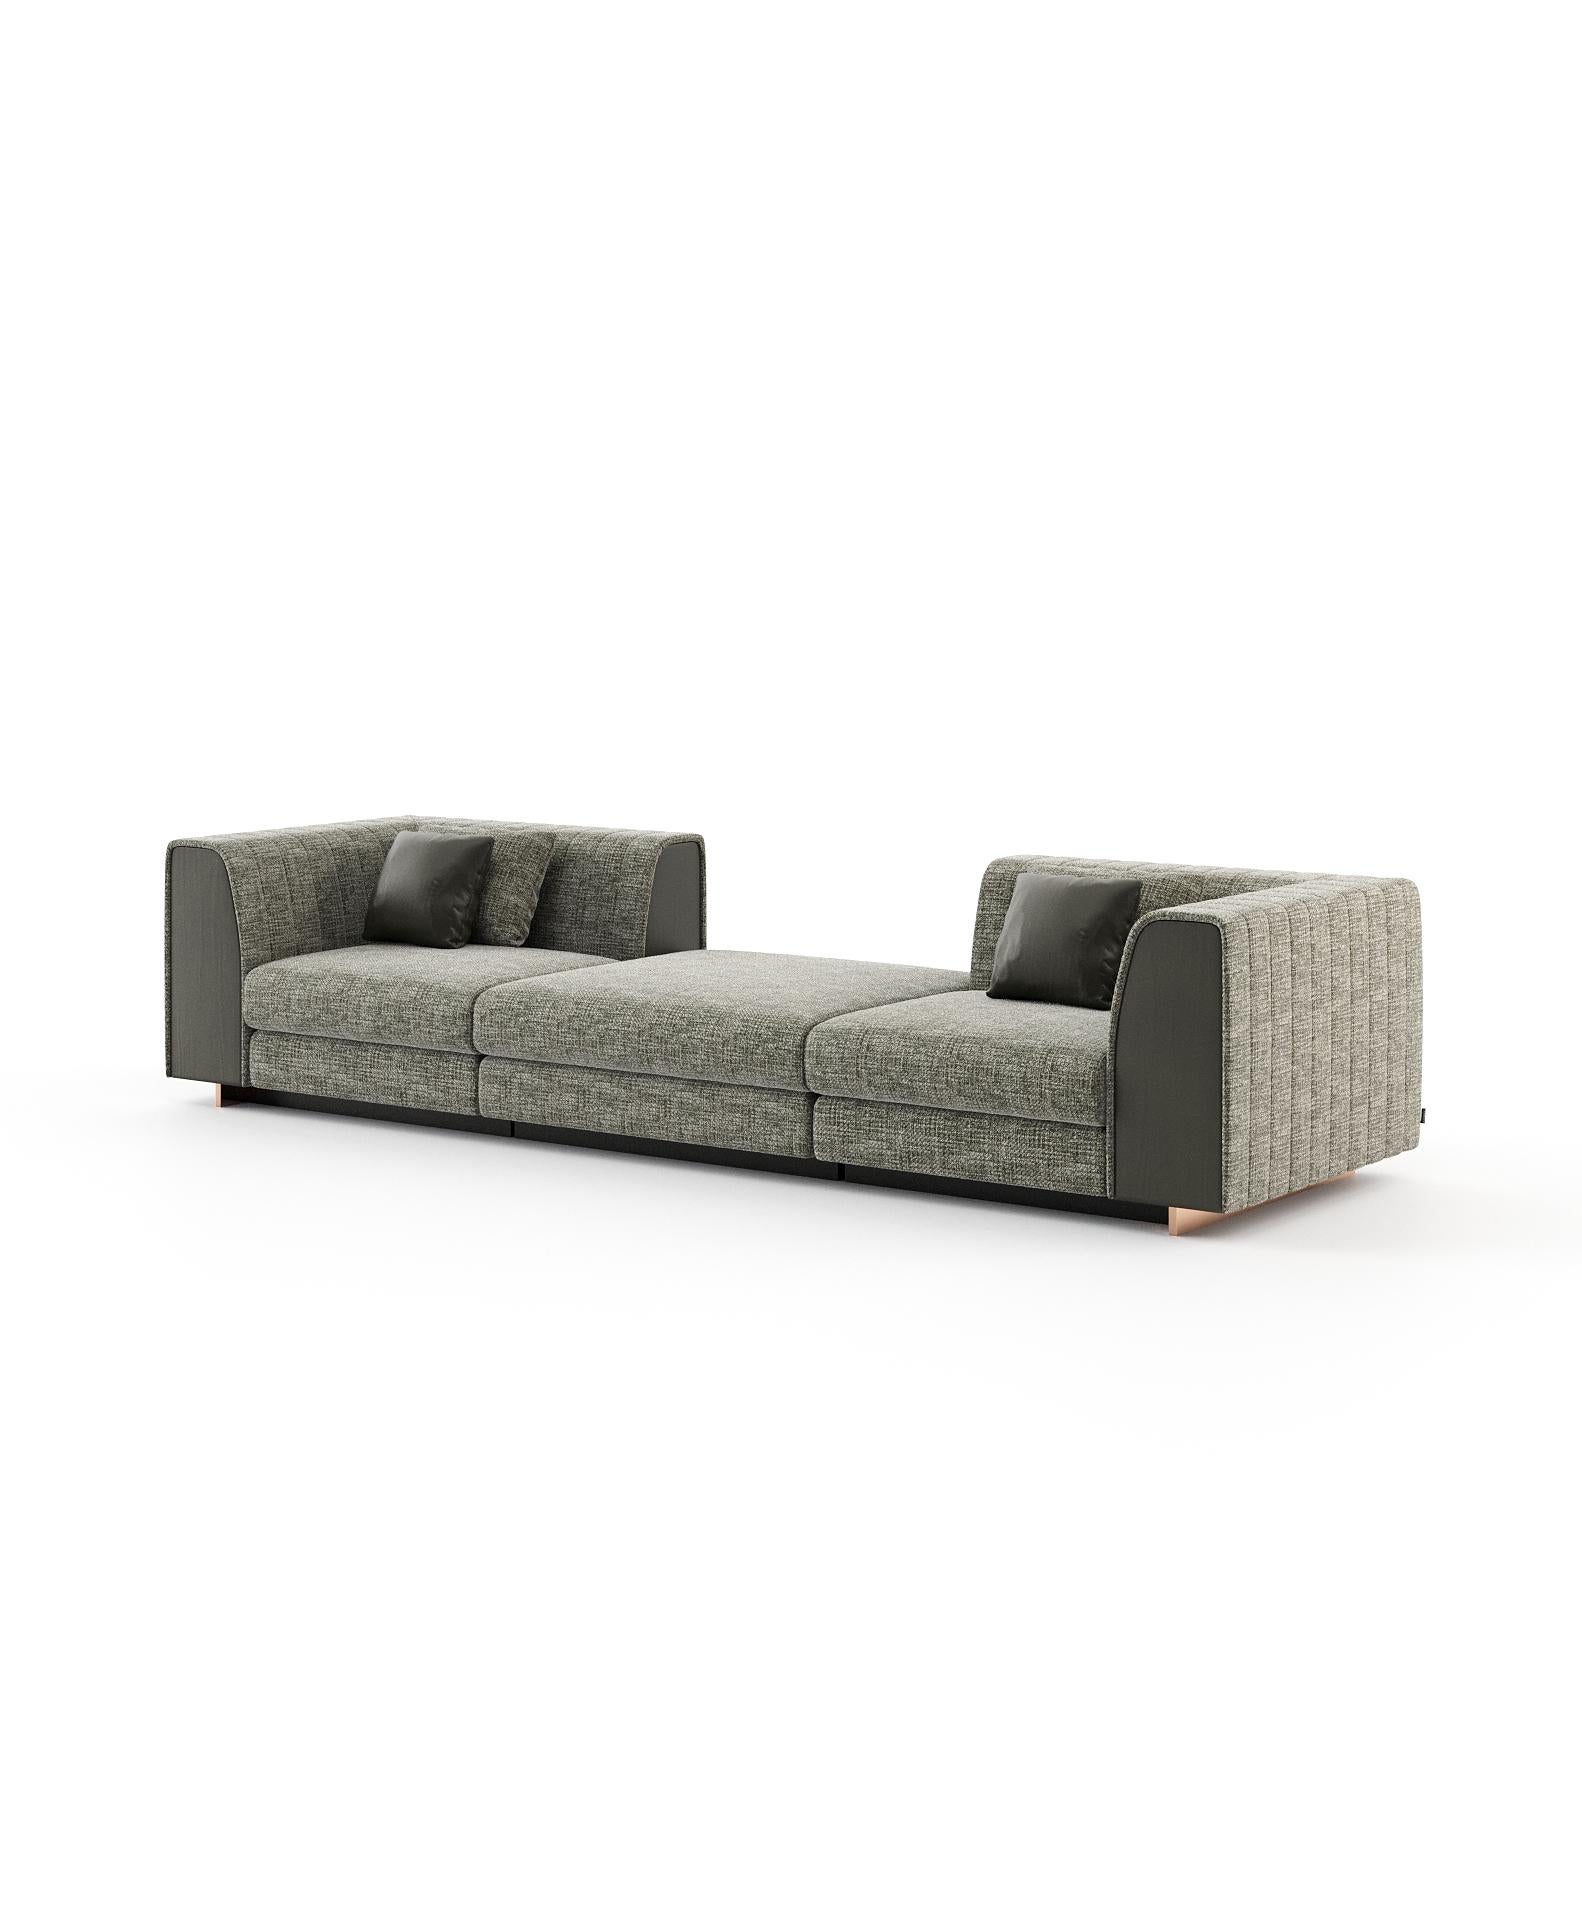 Harry modular sofa quality crafted work provides a striking seating piece for your residential or hospitality projects. Fully upholstered, it is available in different versions, it's a smooth and comfortable sofa for inviting homes.

* Available in